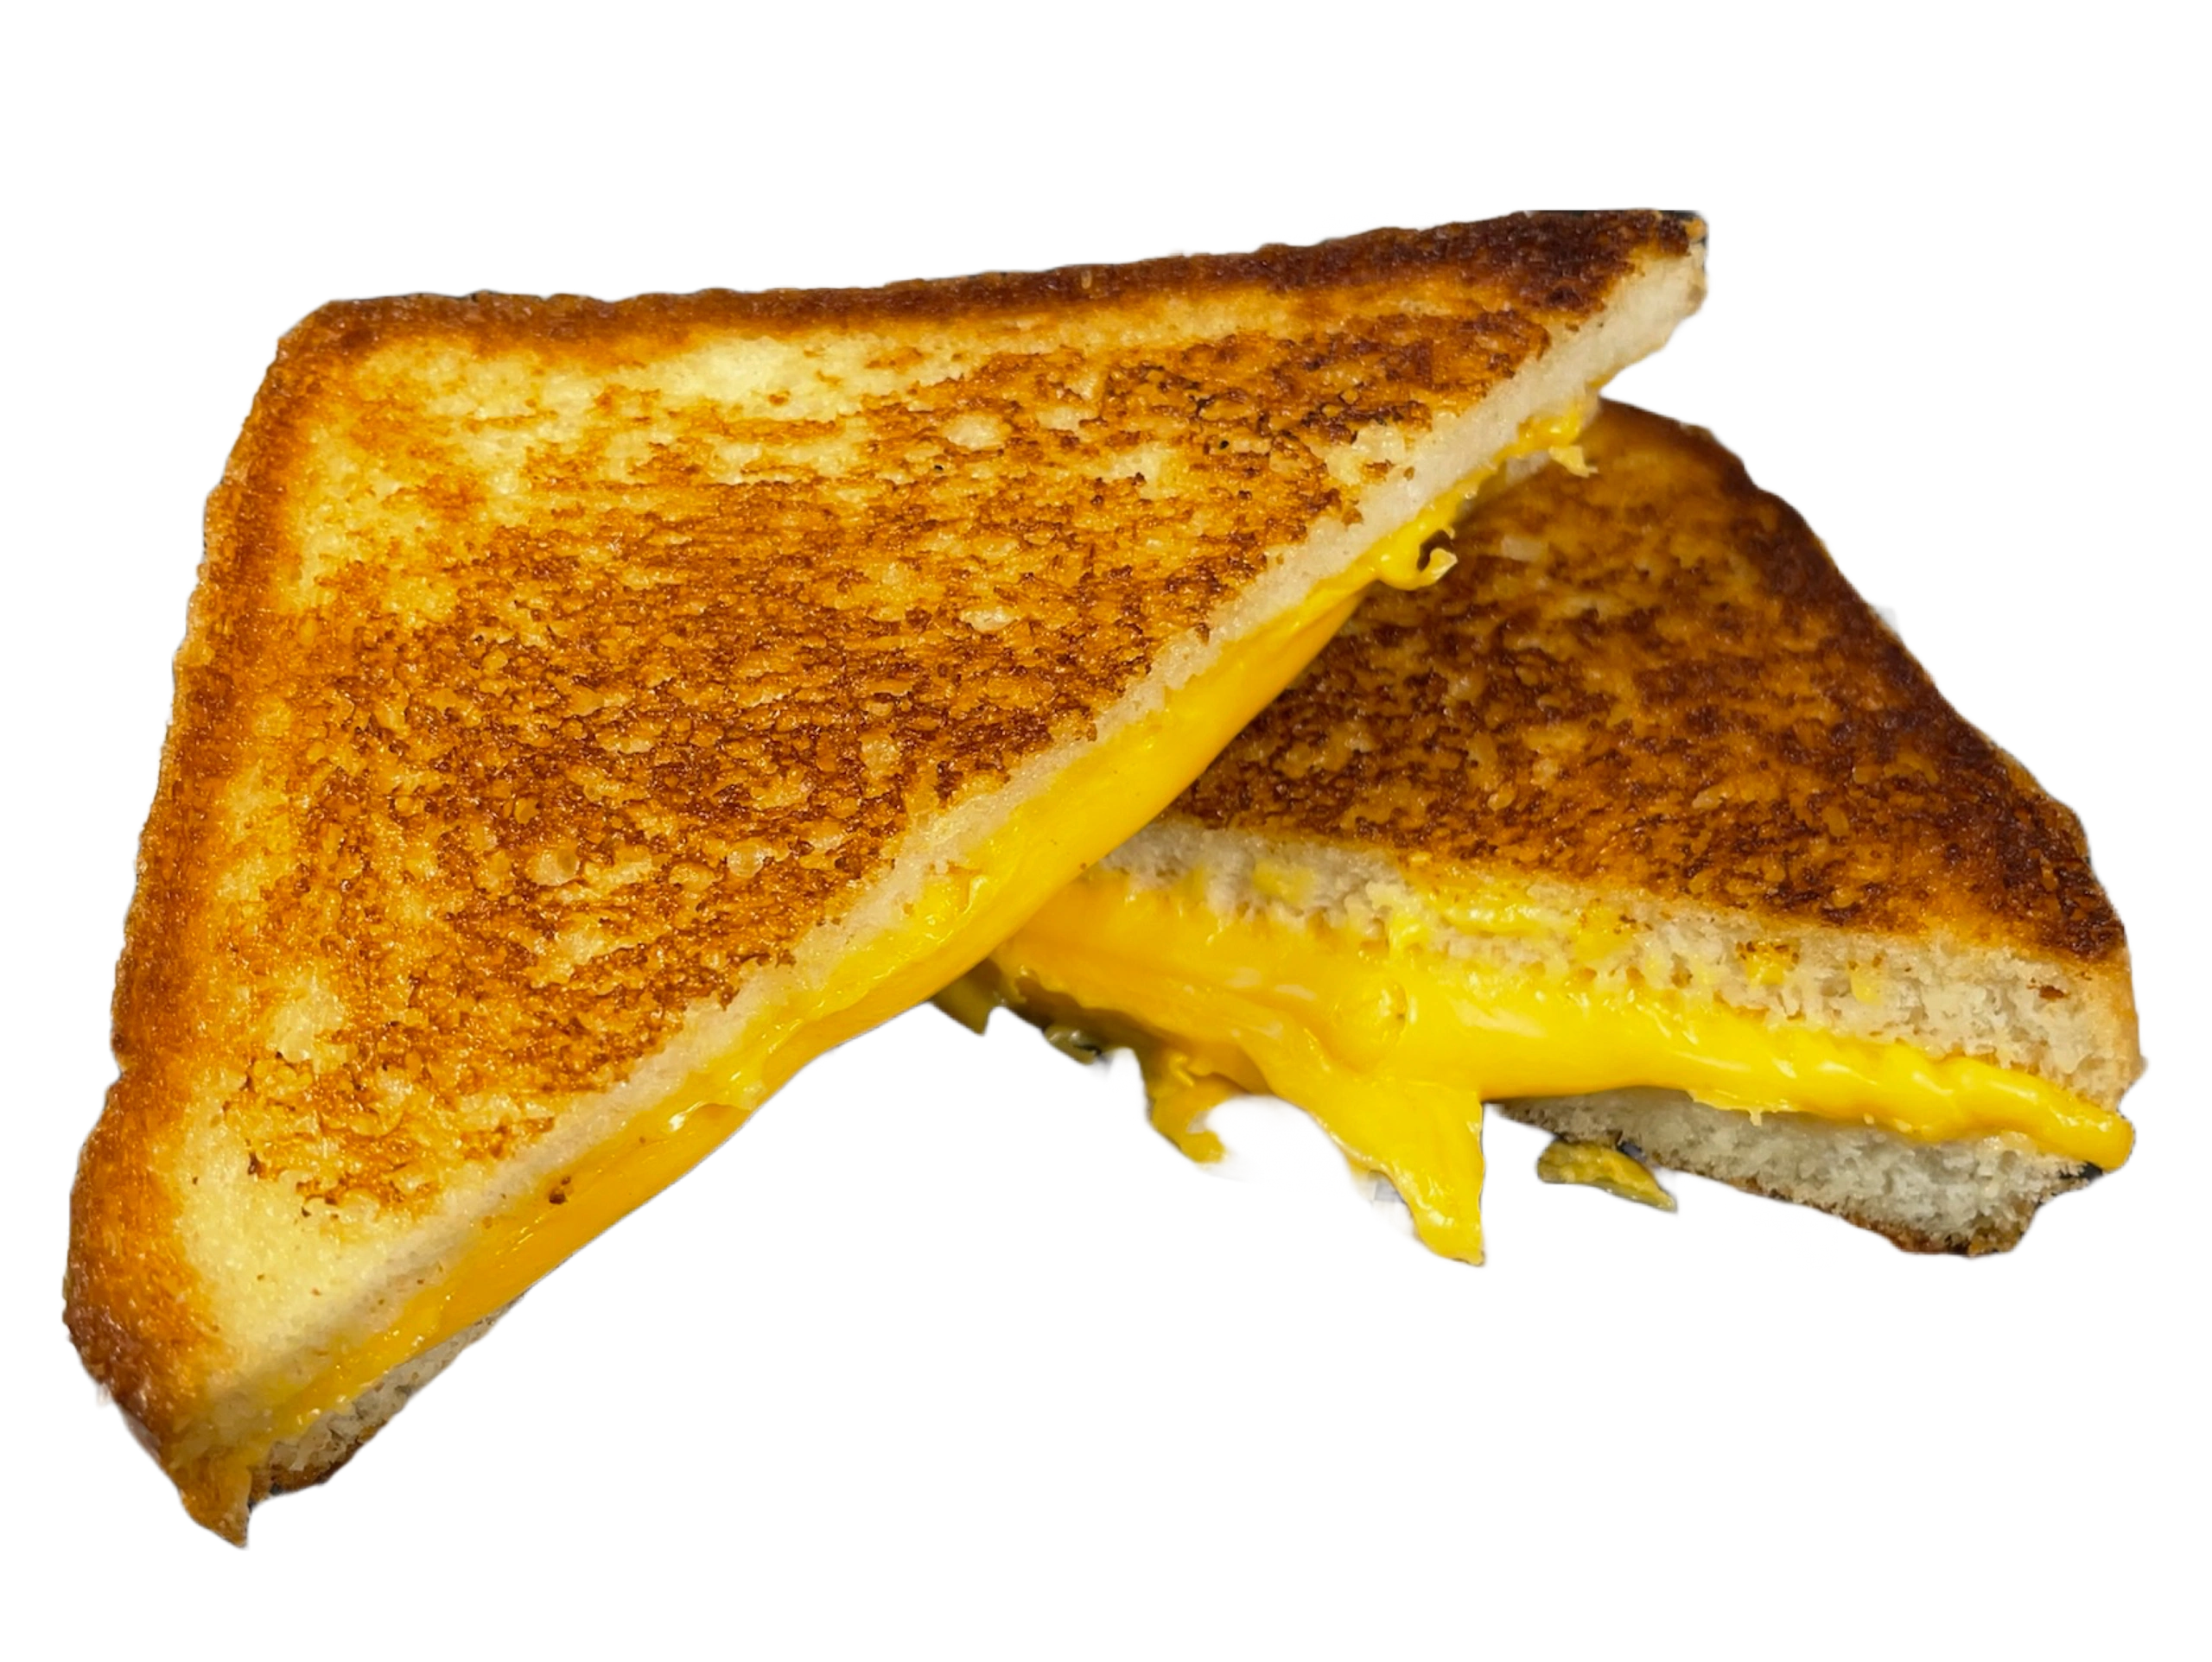 Best Grilled Cheese - Grilled Cheese Please!